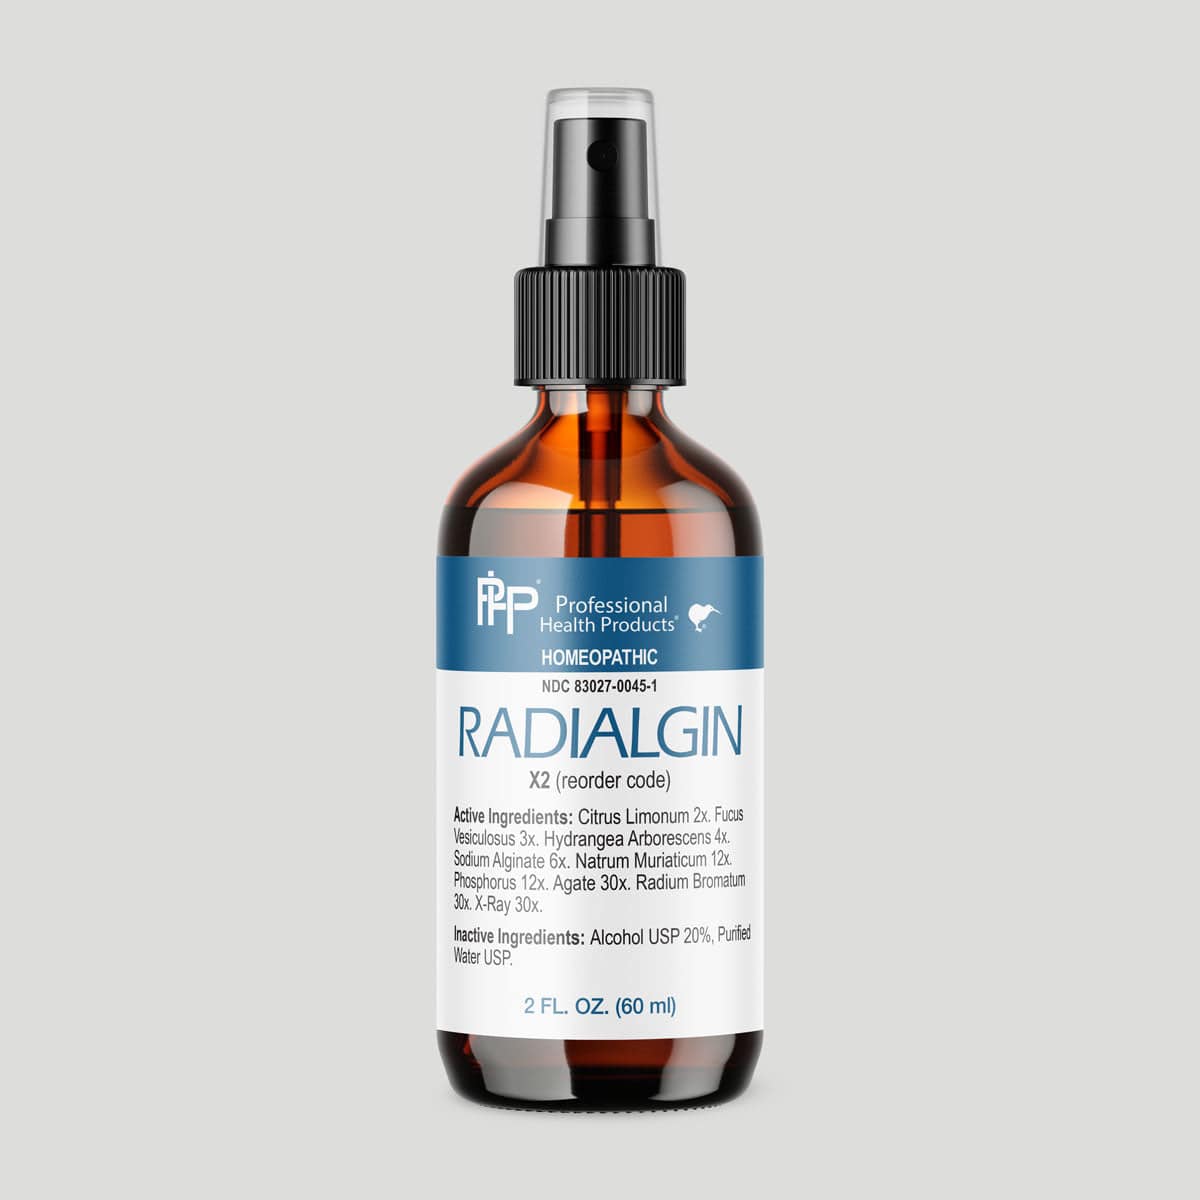 Radialgin Homeopath Prof Health Products Supplement - Conners Clinic